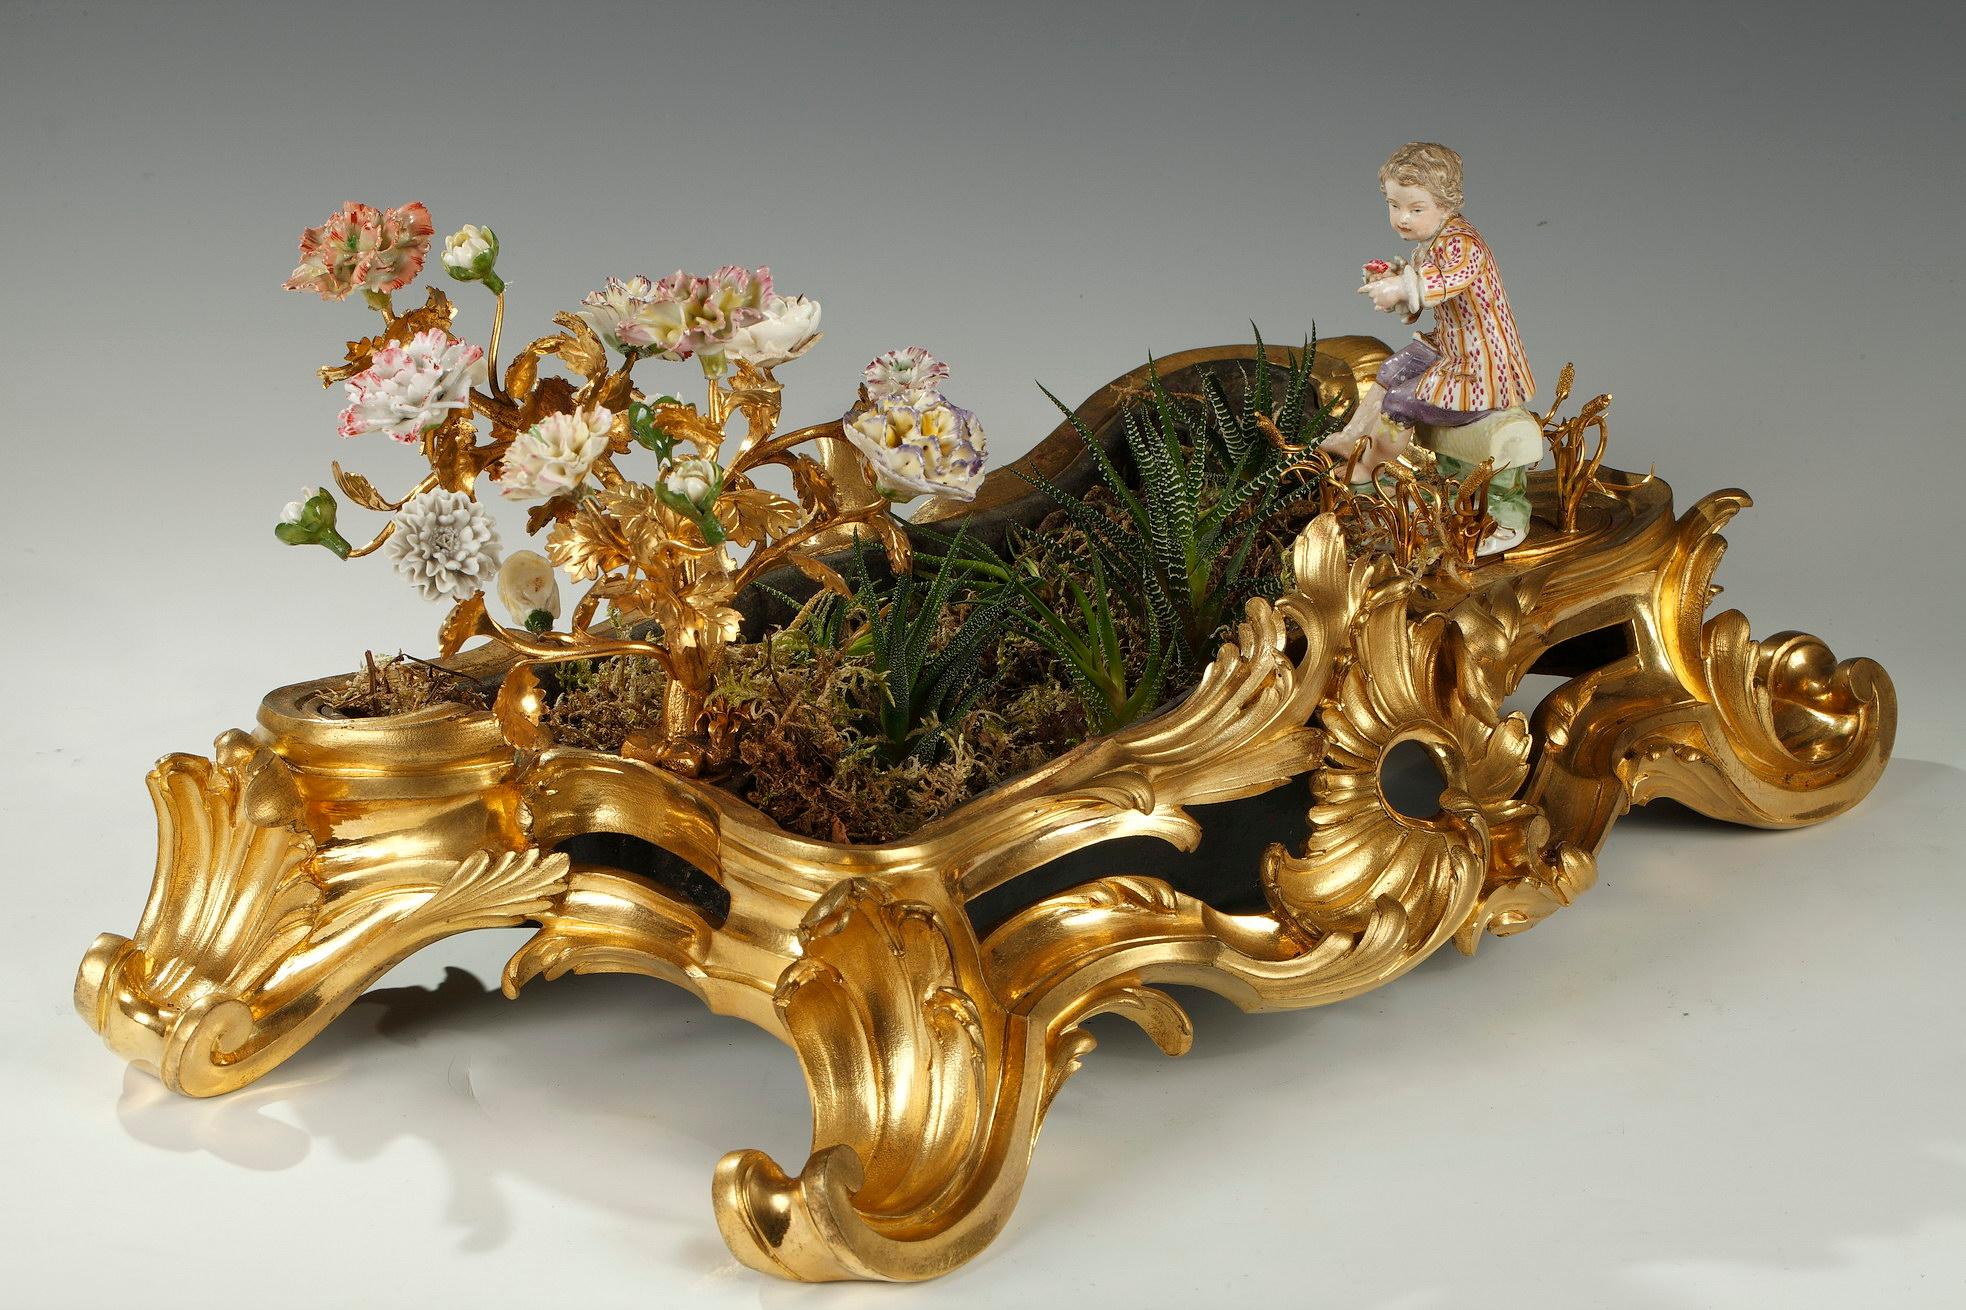 Charming Louis XV period Rocaille planter in chiseled and gilded bronze, scalloped with asymmetrical decoration of acanthus leaves and scrolls, and an openwork shell in its center. A bouquet in gilded bronze and polychrome porcelain flowers, as well